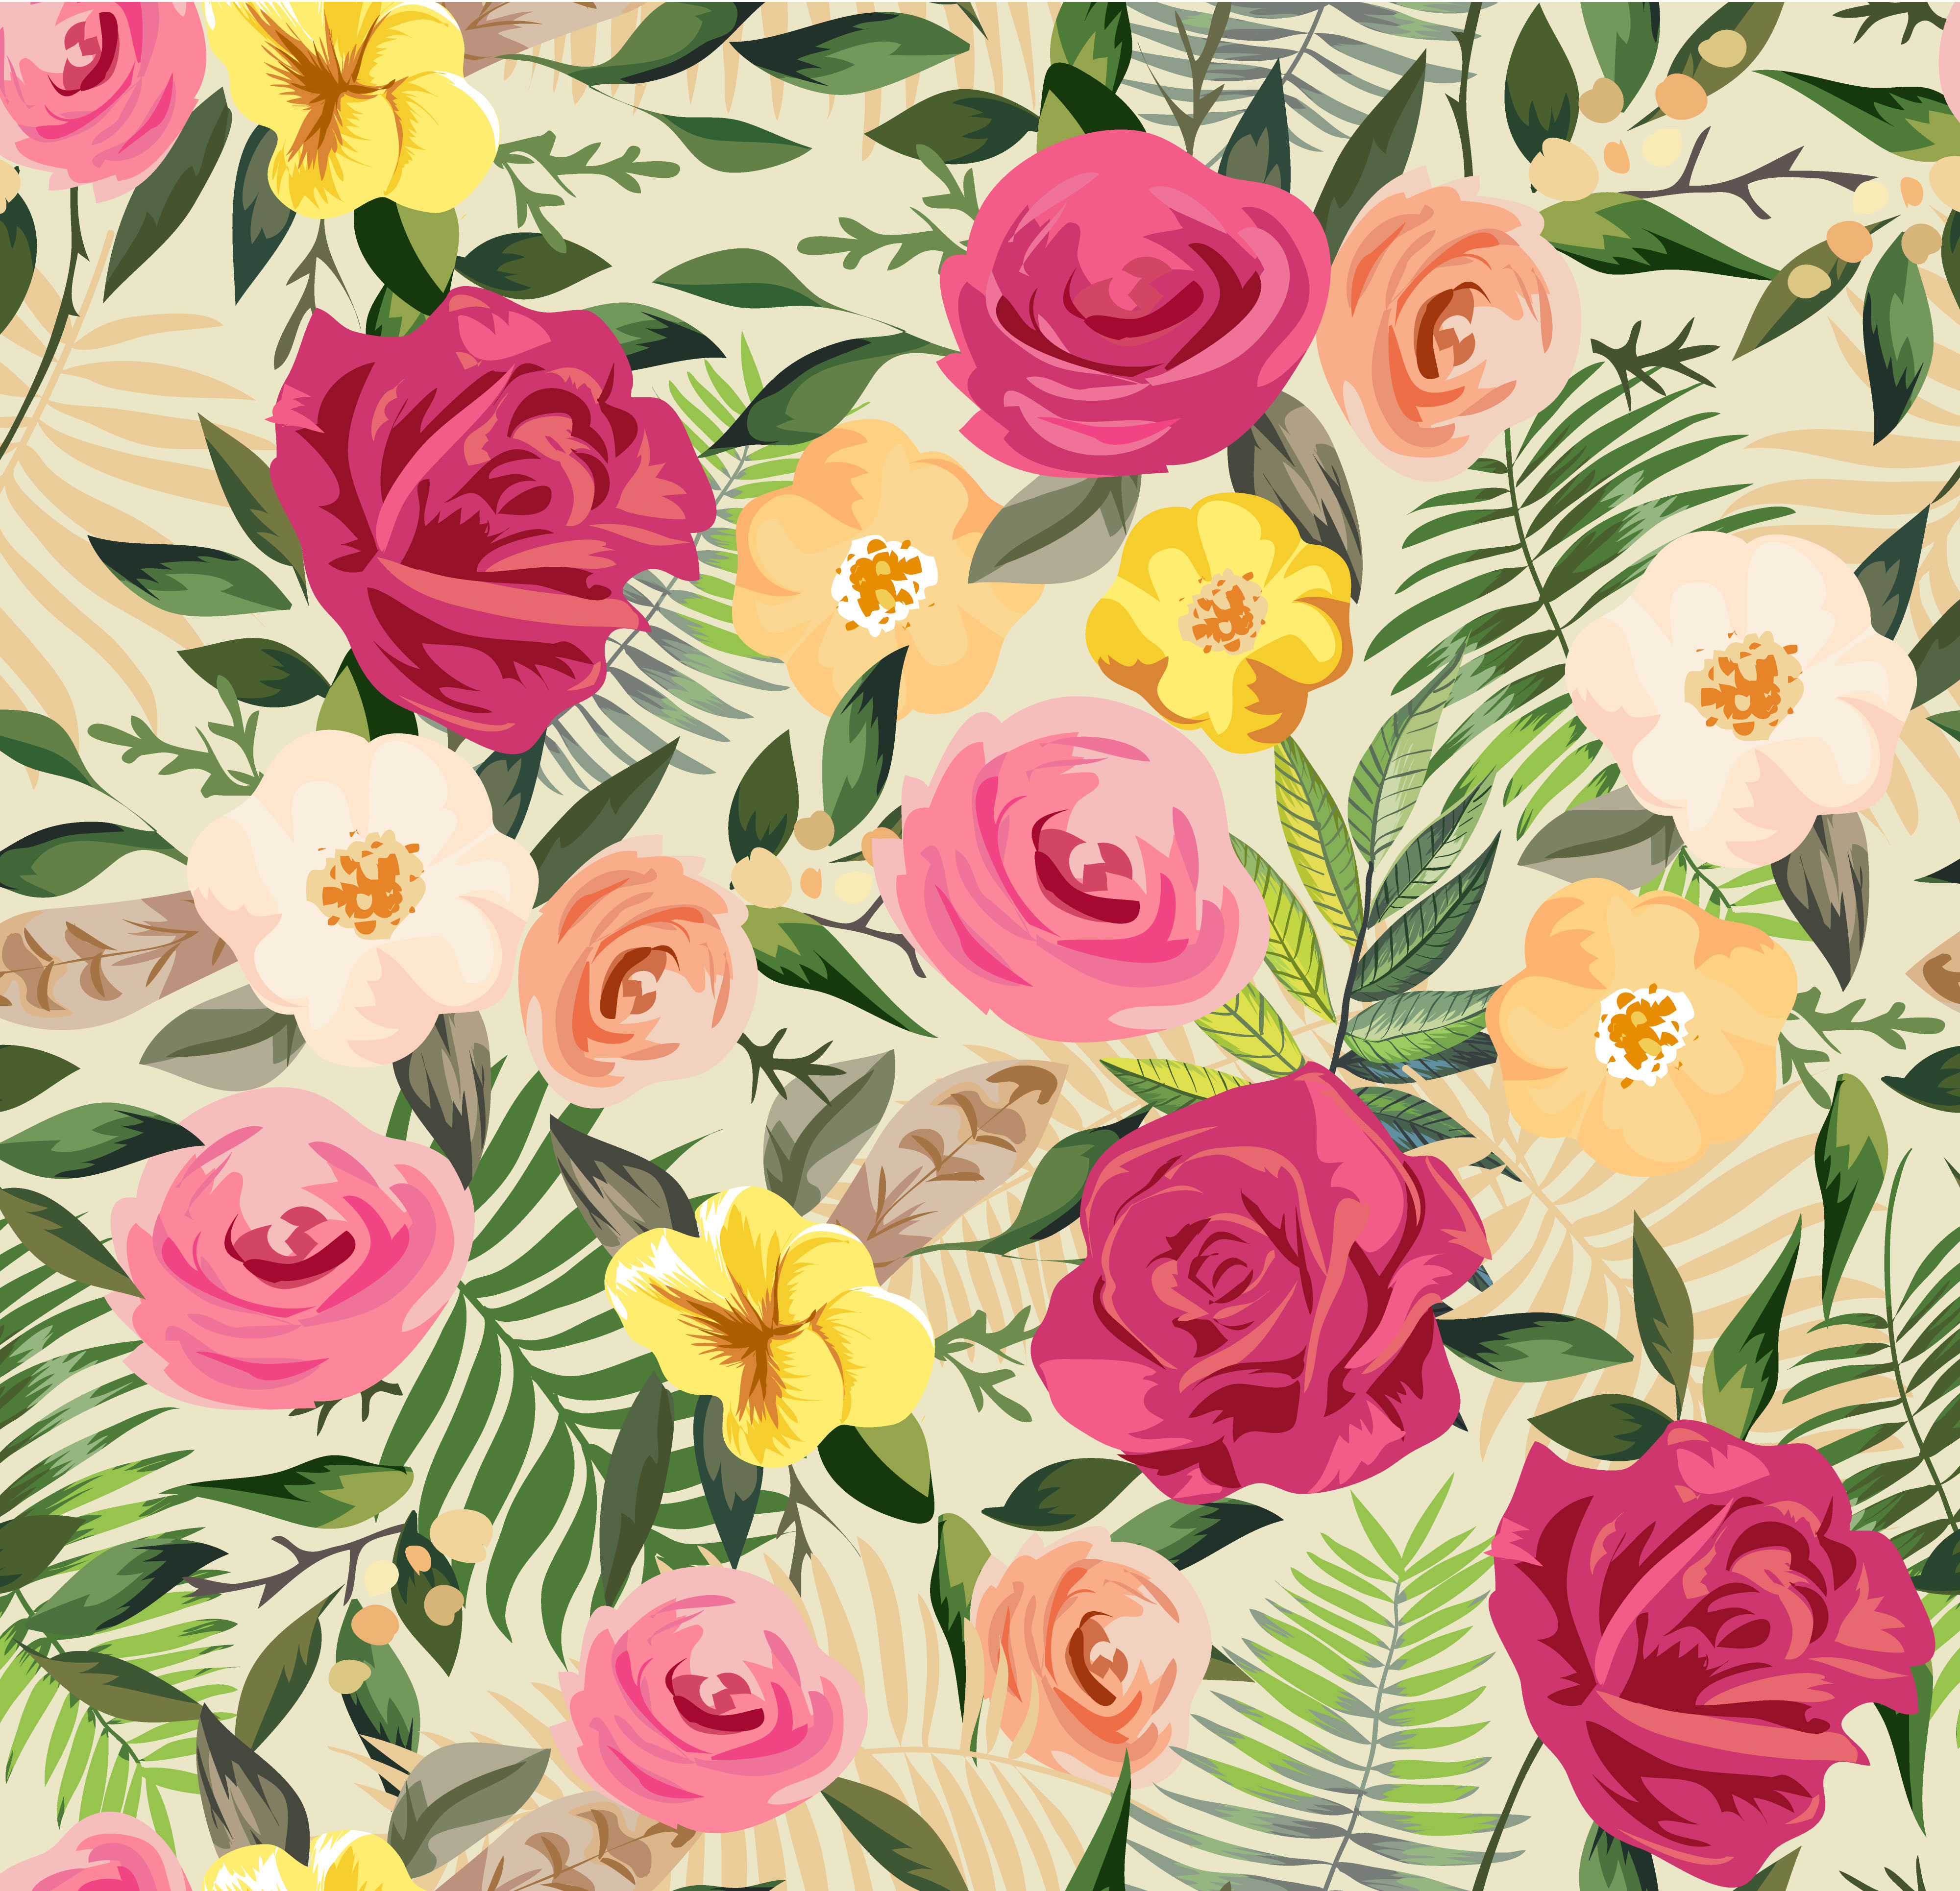 colorful flower pattern 689809 - Download Free Vectors ...